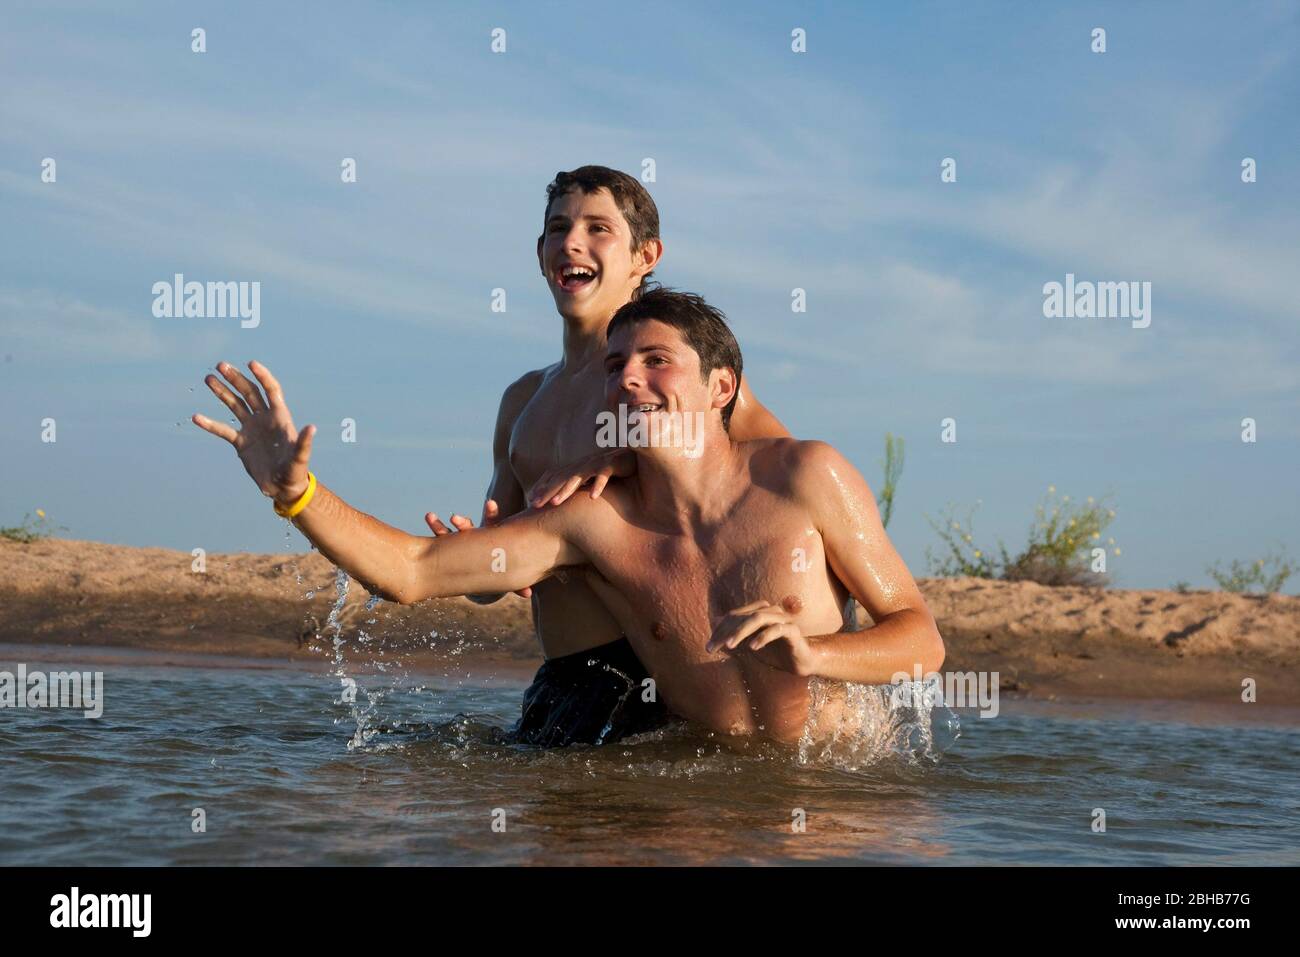 Burnet County Texas USA, August 7 2010: 13-year-old and 16-year-old brothers horse around together in shallow water off Shaw Island on Lake Buchanan in the summertime. ©Bob Daemmrich Stock Photo